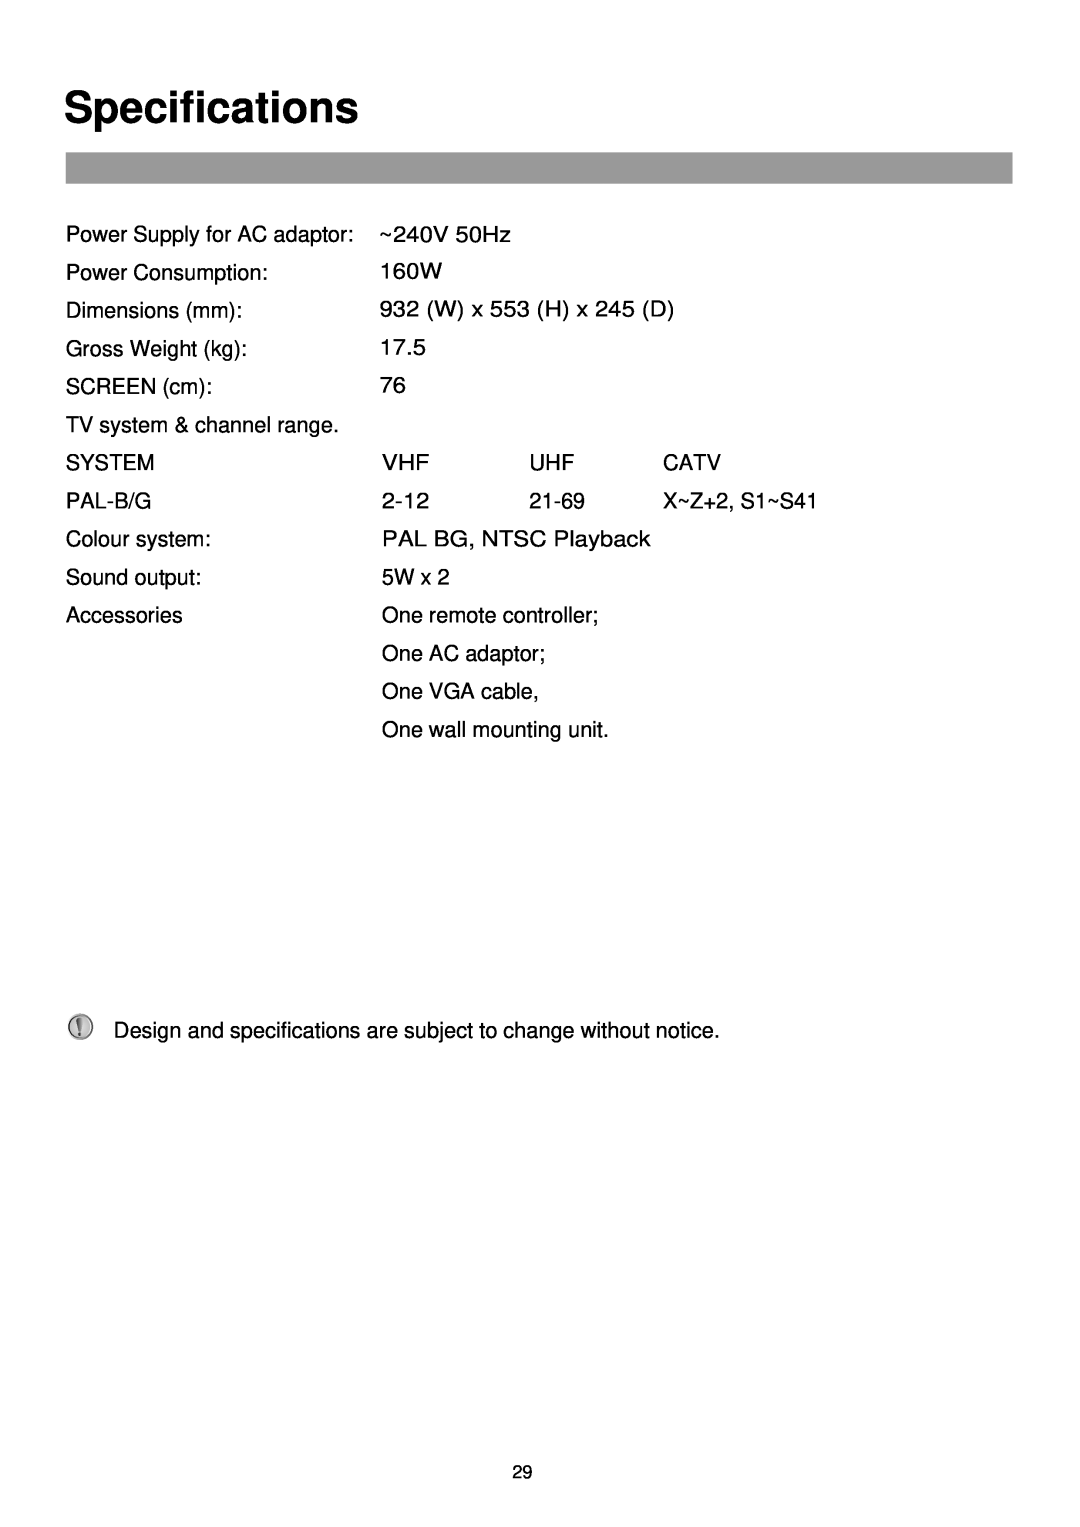 Palsonic TFTV-760 owner manual Specifications 